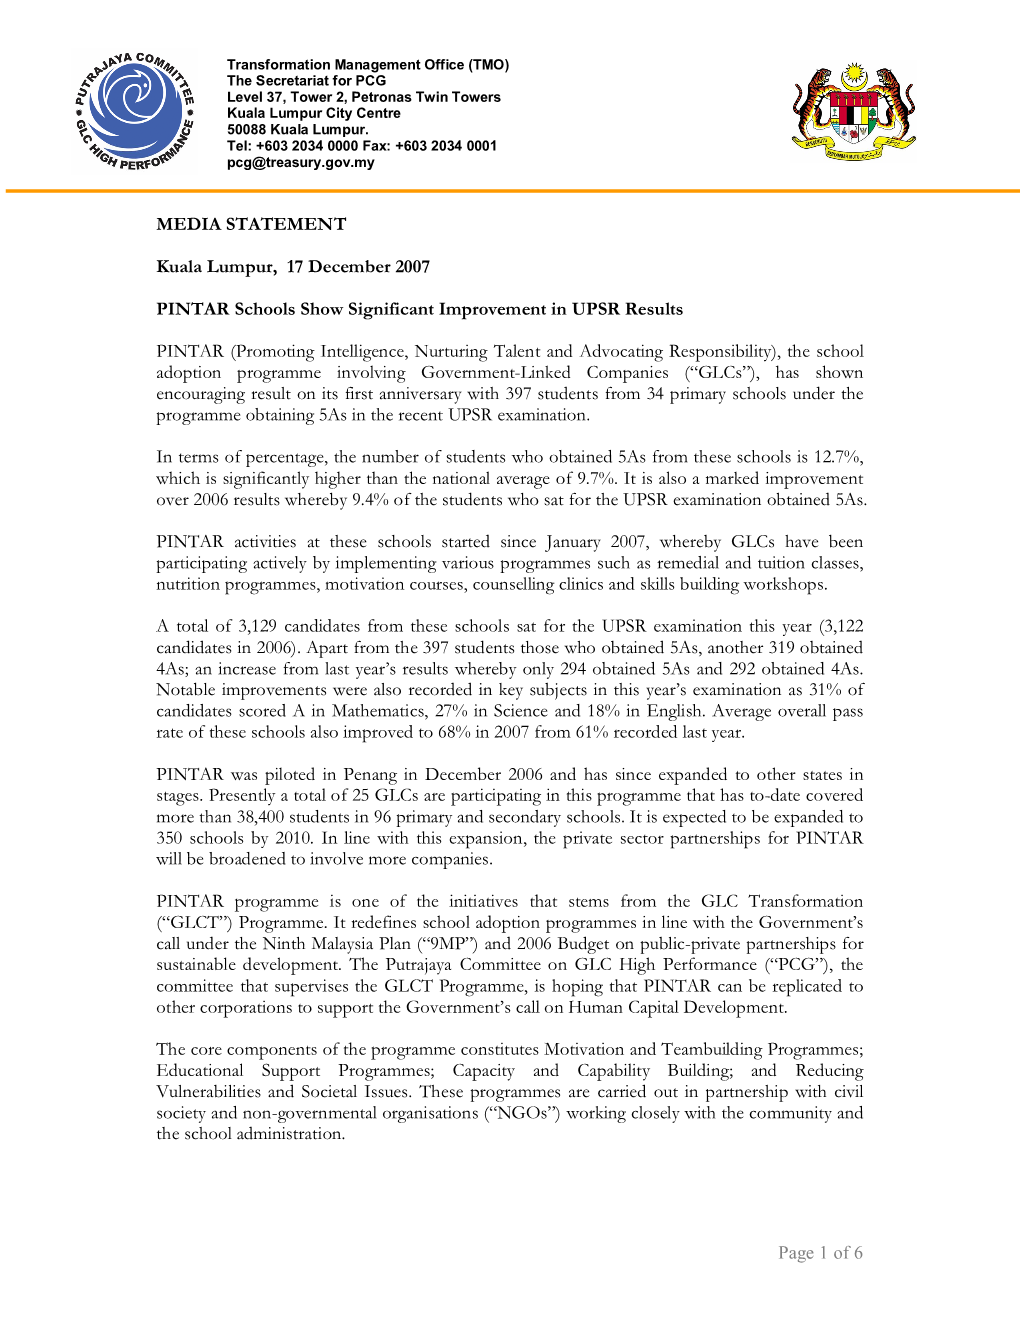 Page 1 of 6 MEDIA STATEMENT Kuala Lumpur, 17 December 2007 PINTAR Schools Show Significant Improvement in UPSR Results PINTAR